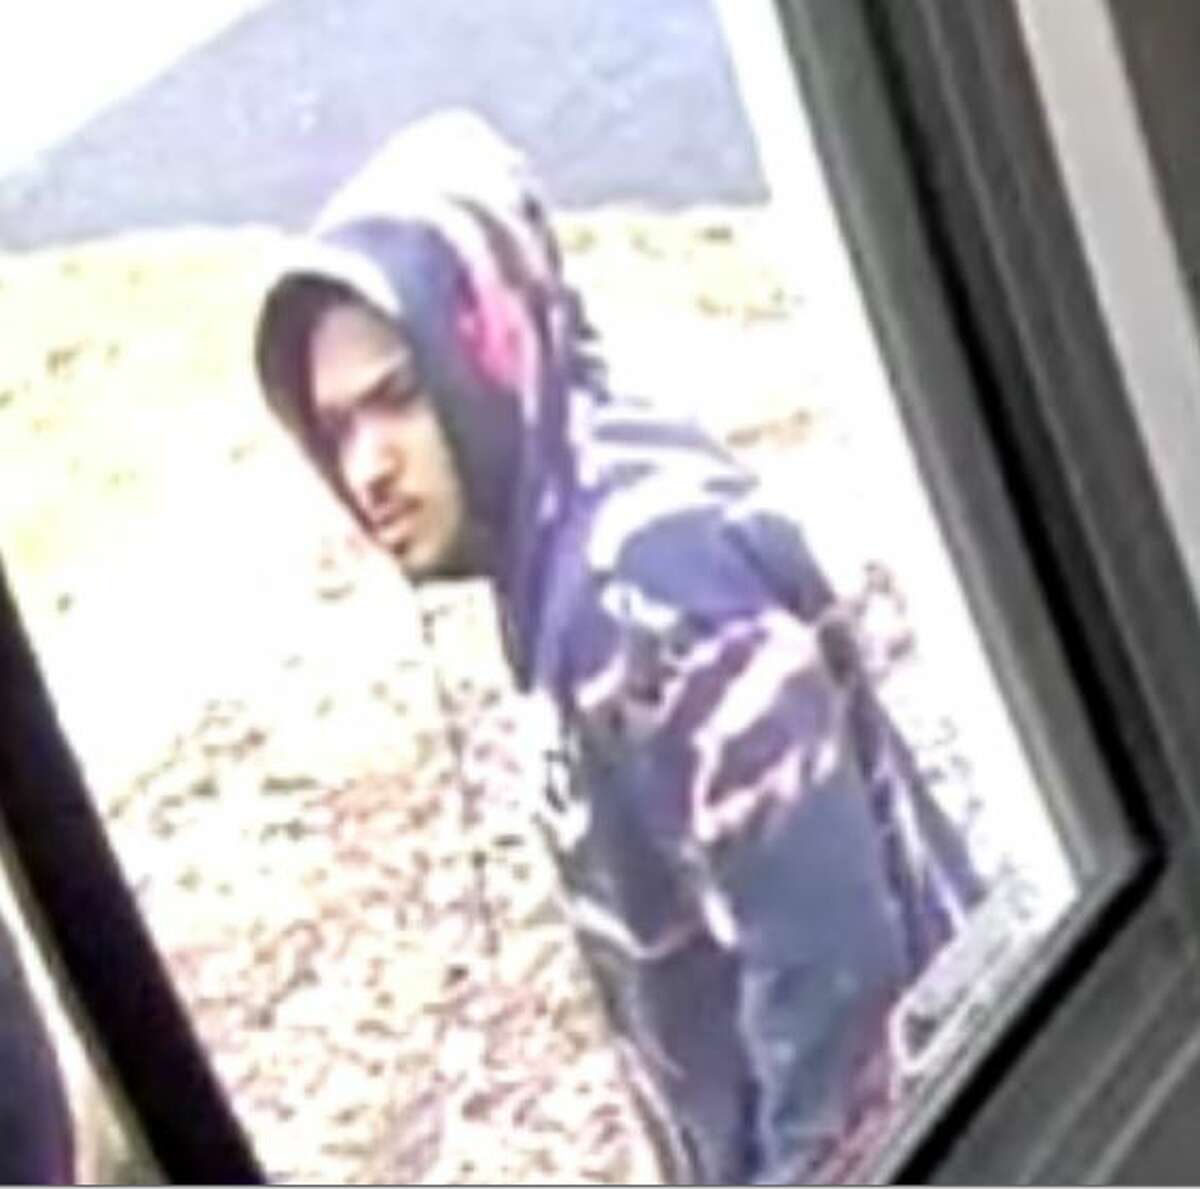 Manchester police release photos of man they say robbed and assaulted a FedEx delivery driver last week.